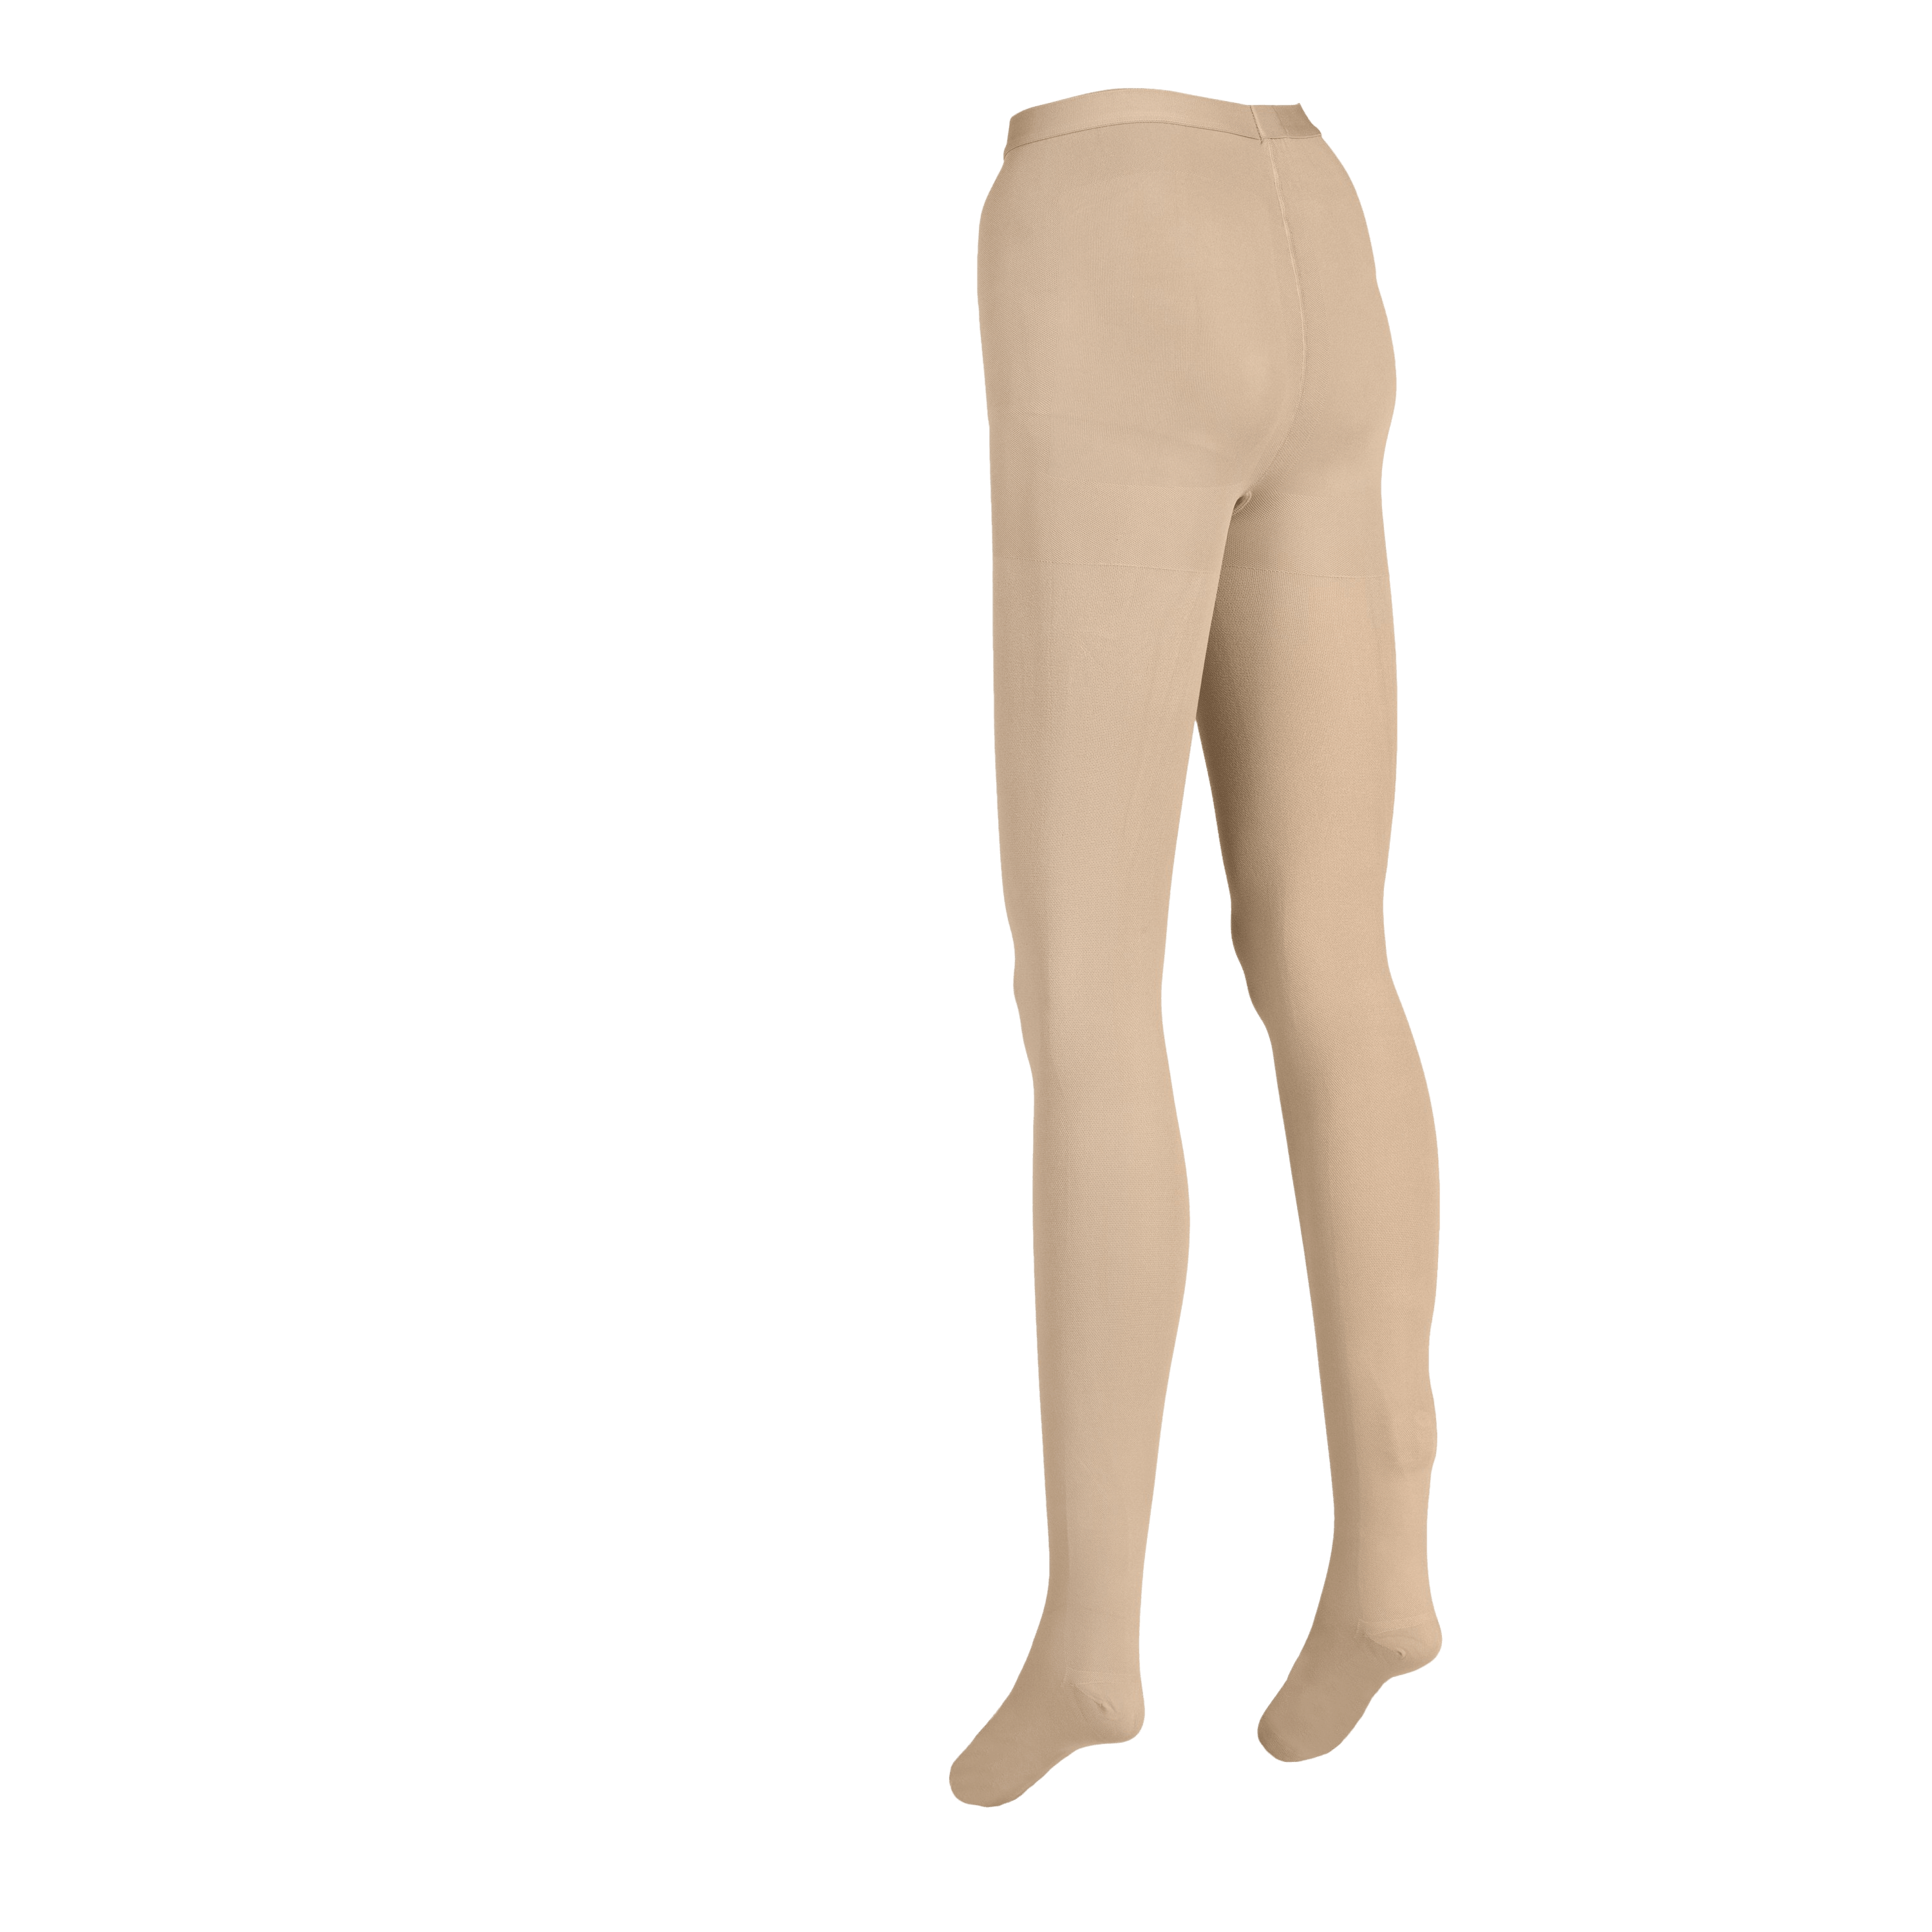 Womens Compression Pantyhose for Swelling 20-30mmHg with Open Toe - Beige,  Small 